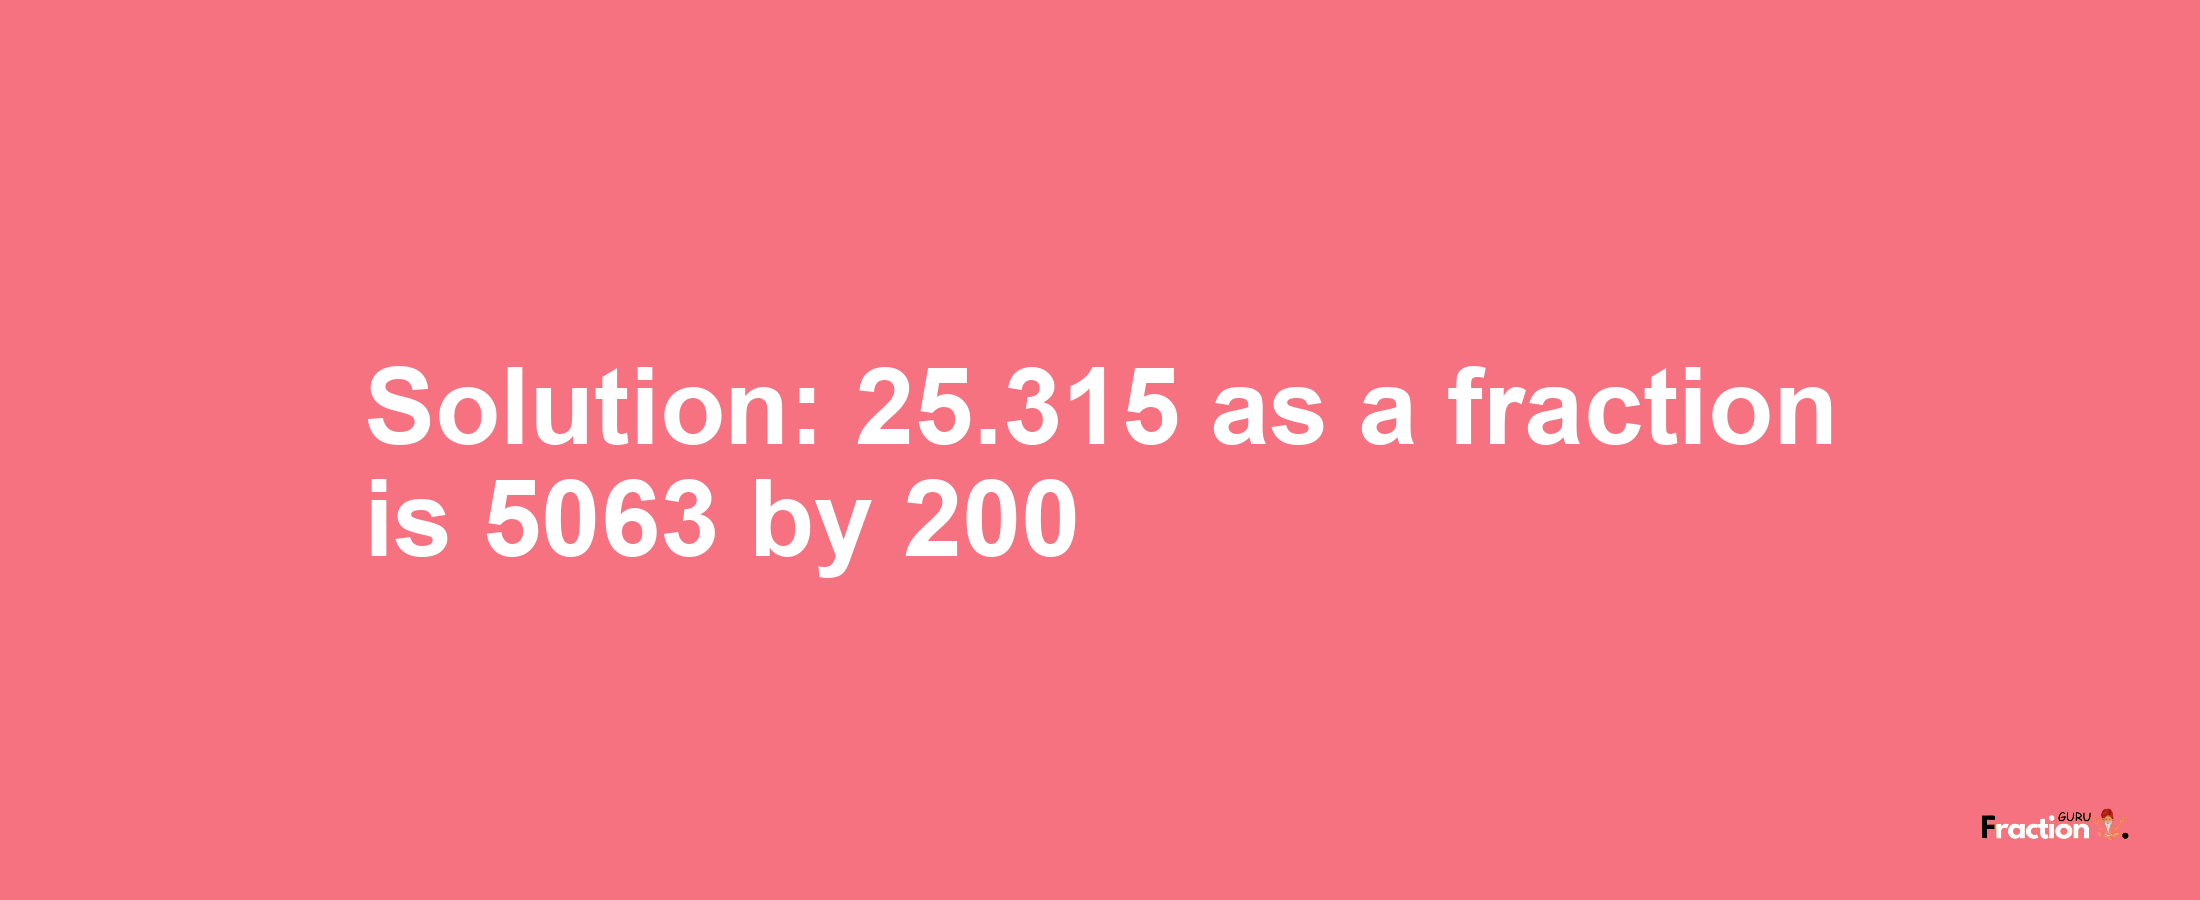 Solution:25.315 as a fraction is 5063/200